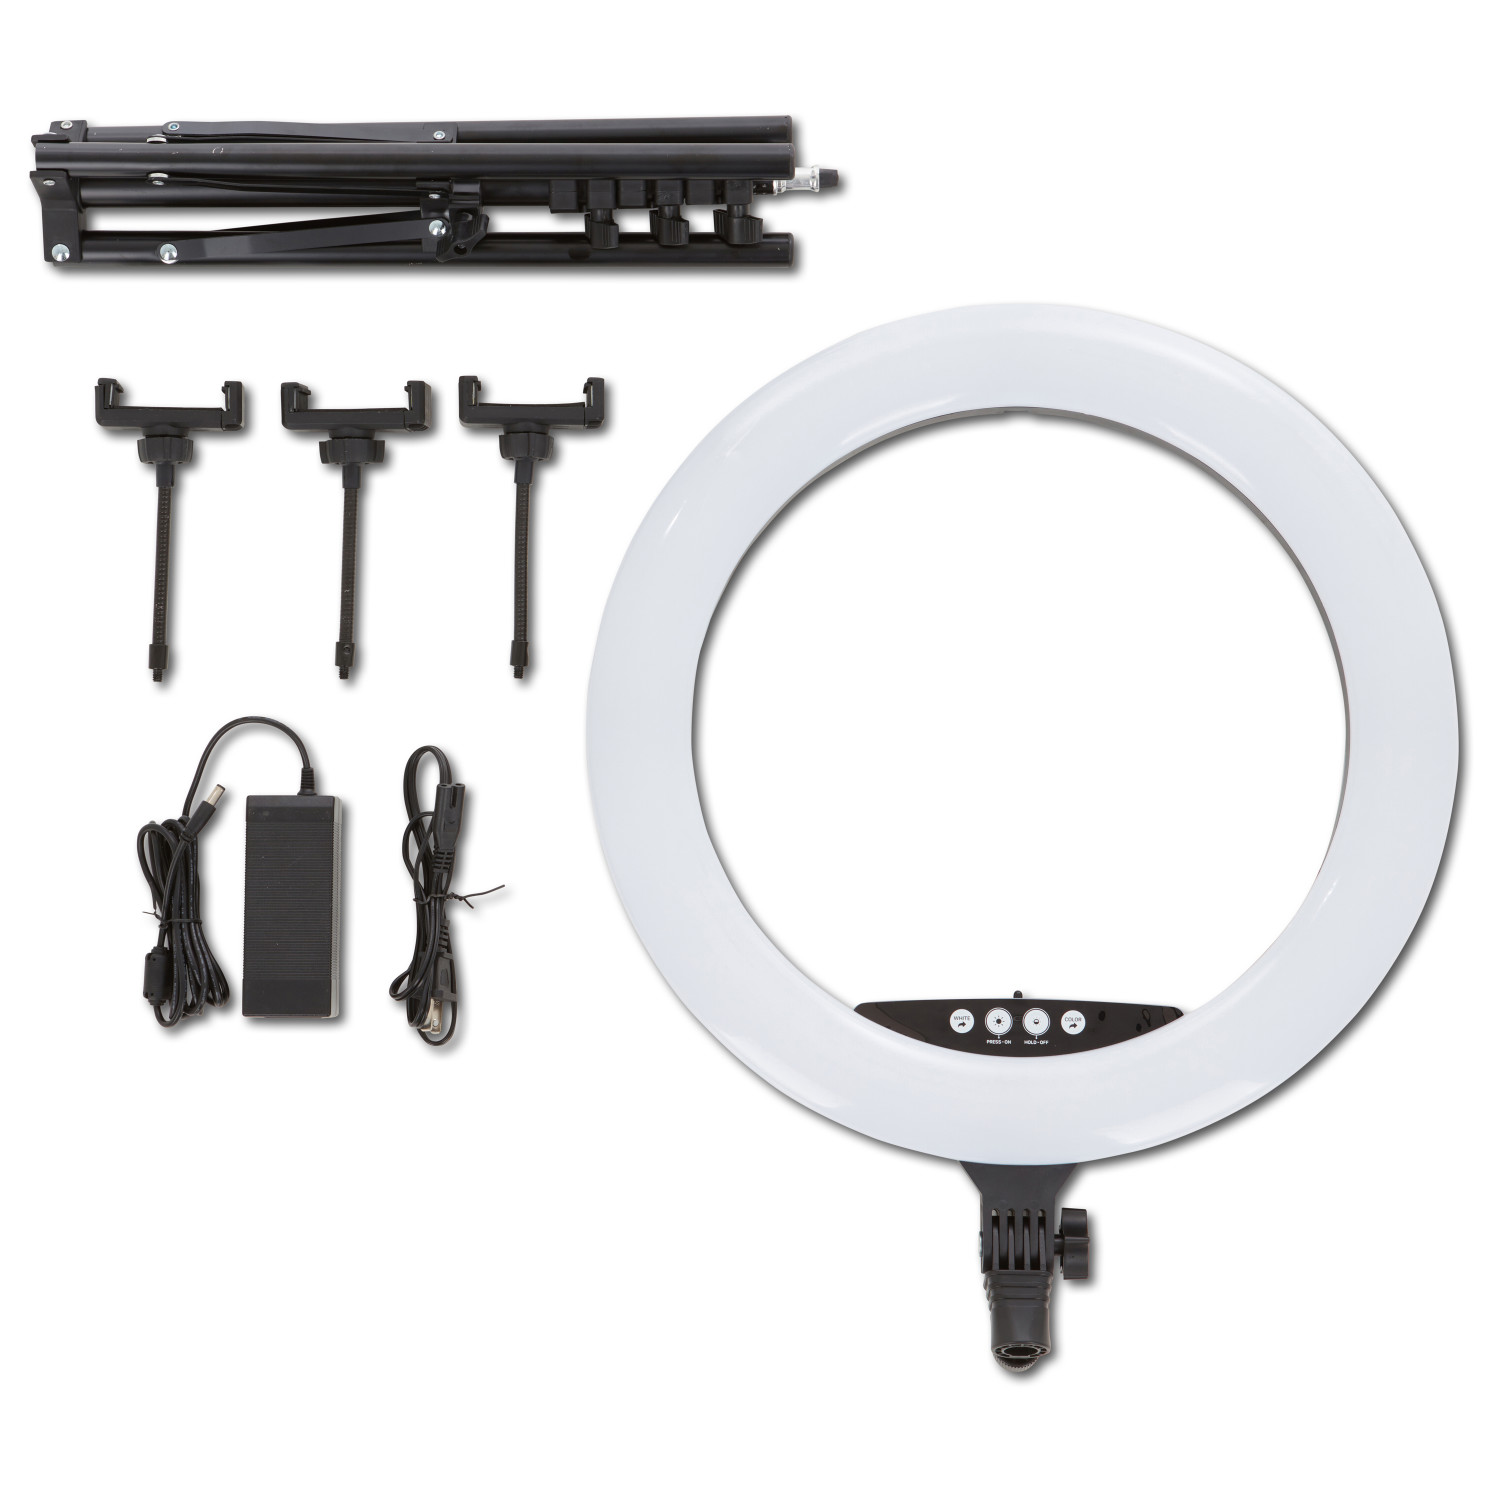 Vivitar 18" LED RGB Ring Light with Tripod, Phone Holder USB Charging Ports, and Wireless Remote - image 5 of 13